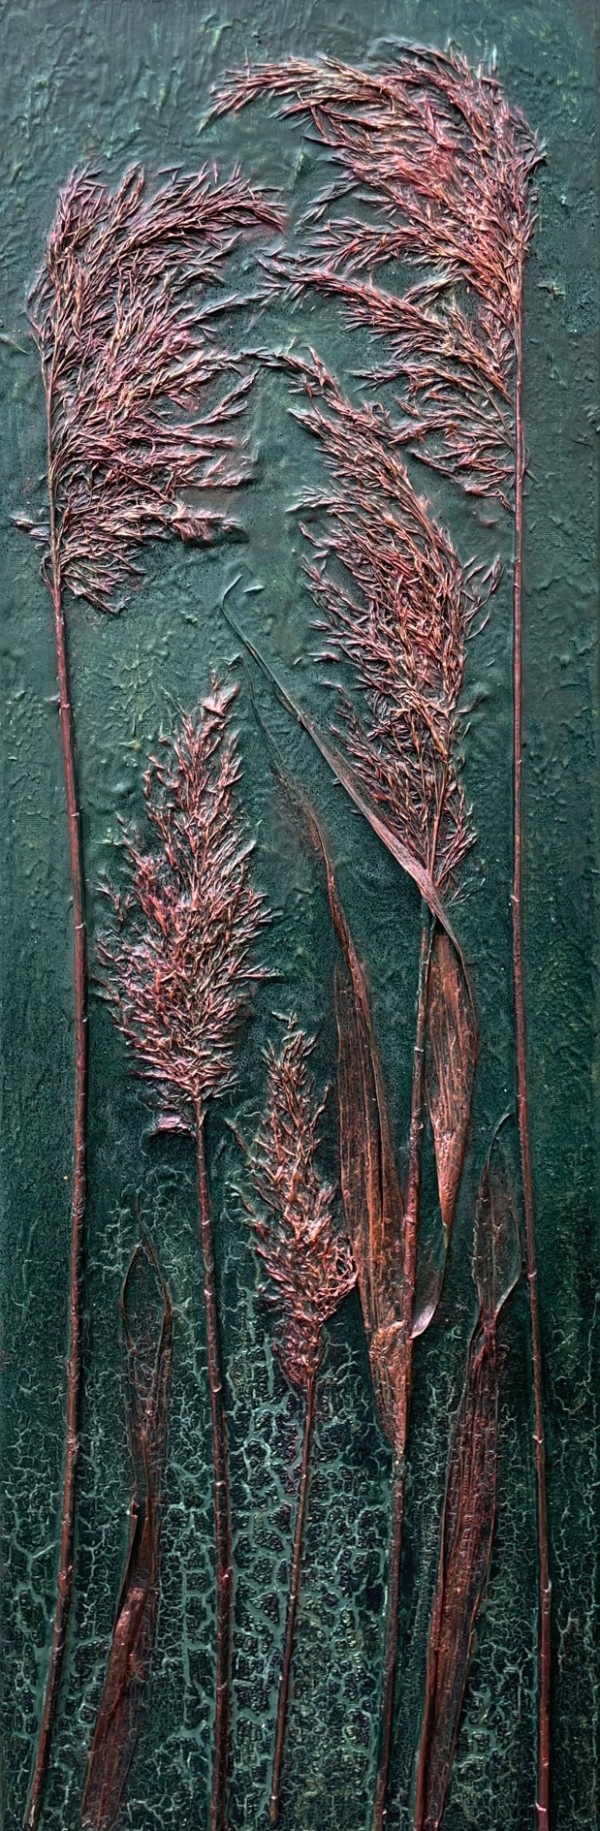 Bronze Reeds by sally